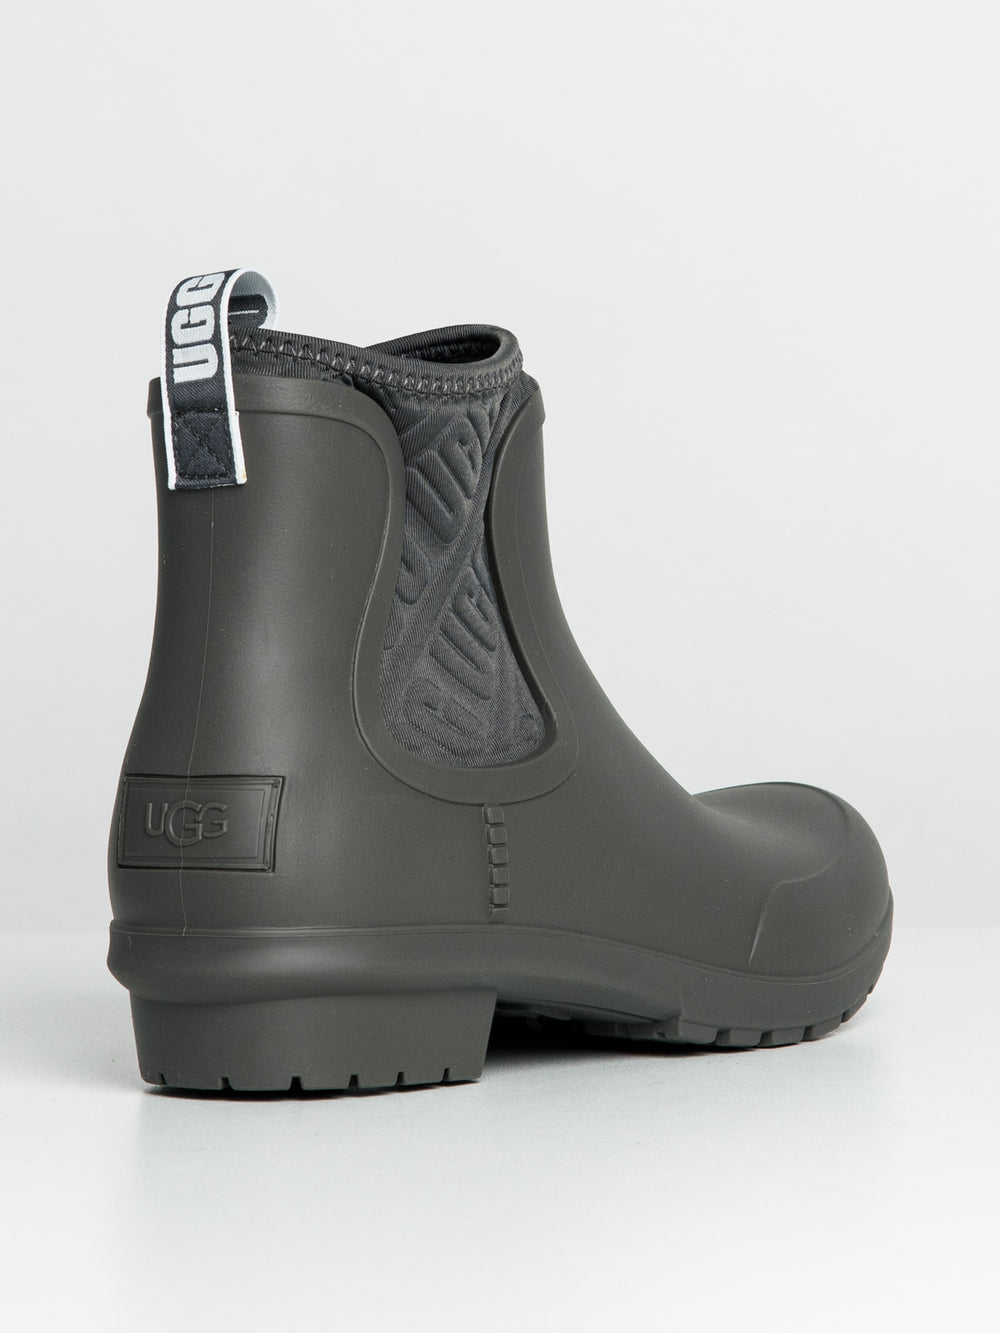 WOMENS UGG CHEVONNE BOOT - CLEARANCE